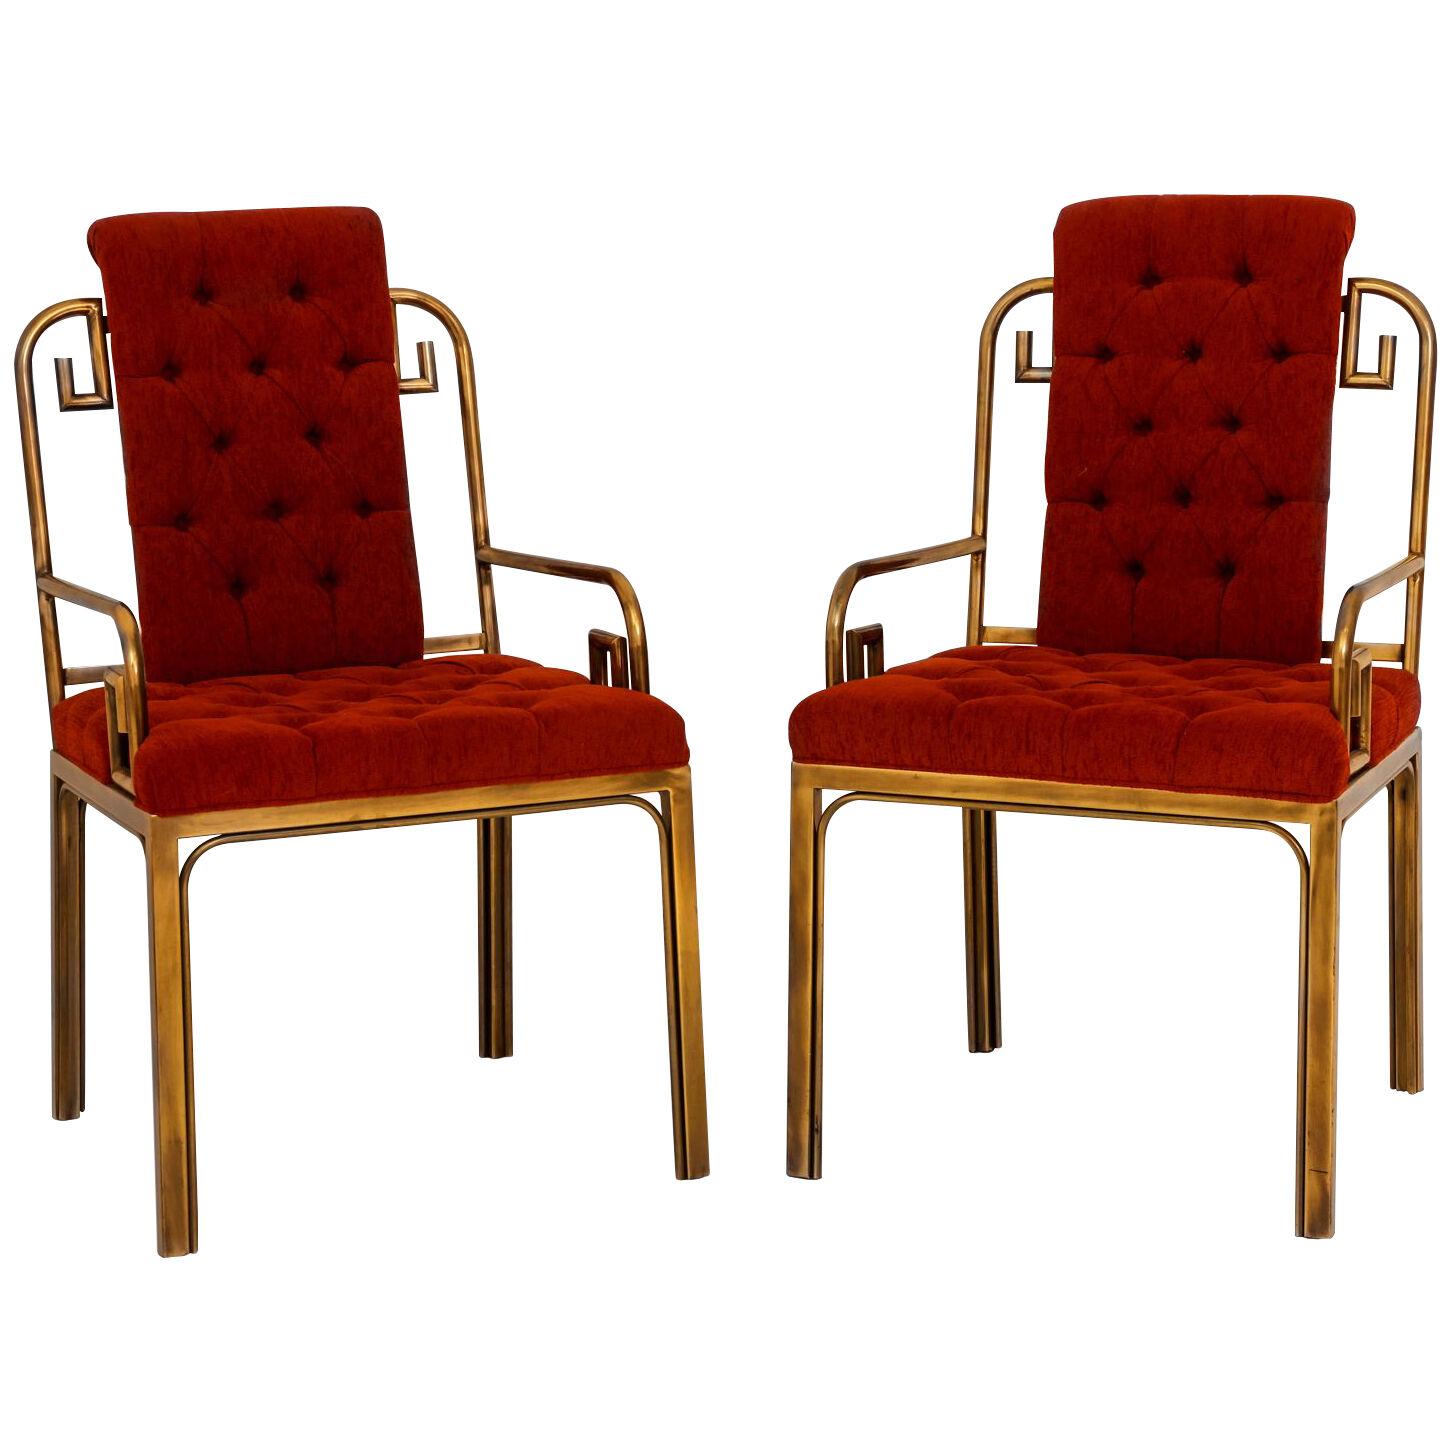 A Pair of Brass Greek Key Chairs Designed by Bernhard Rohne for Master Craft